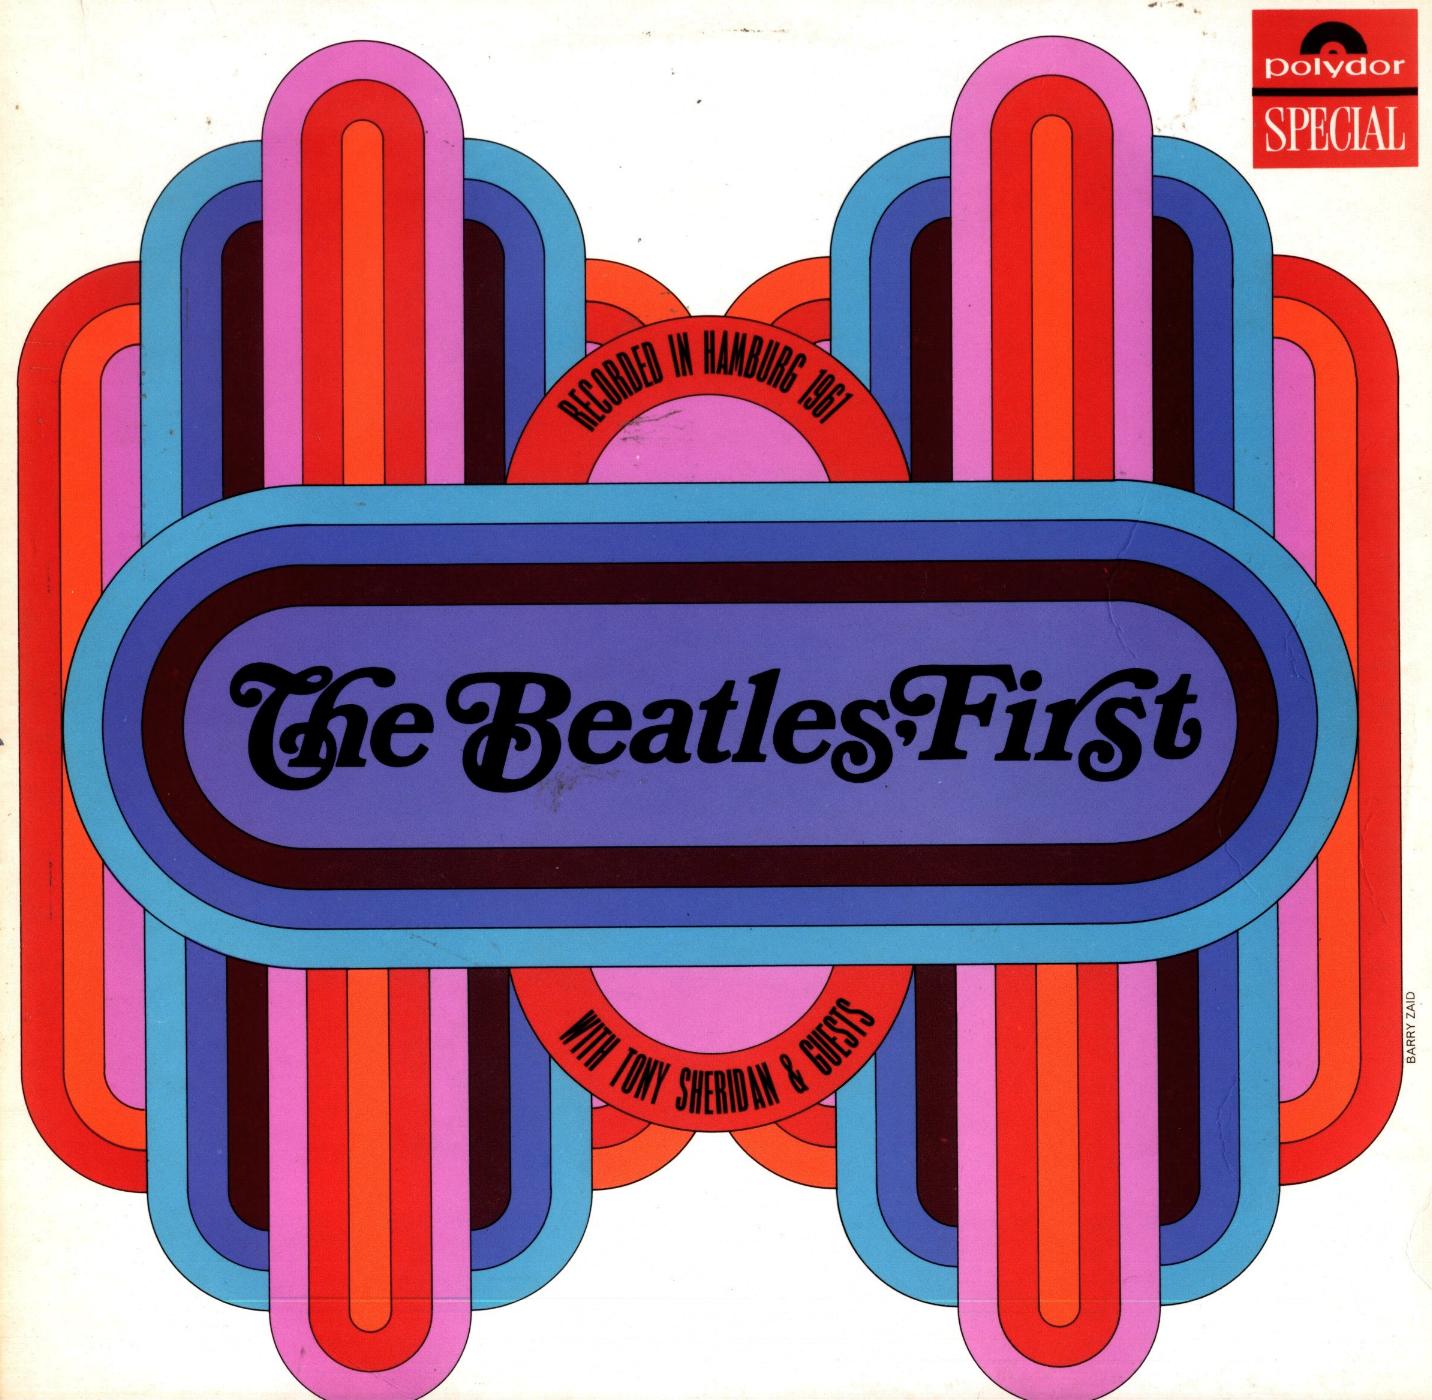 The Beatles Collection » The Beatles First, Polydor Special MCPS 